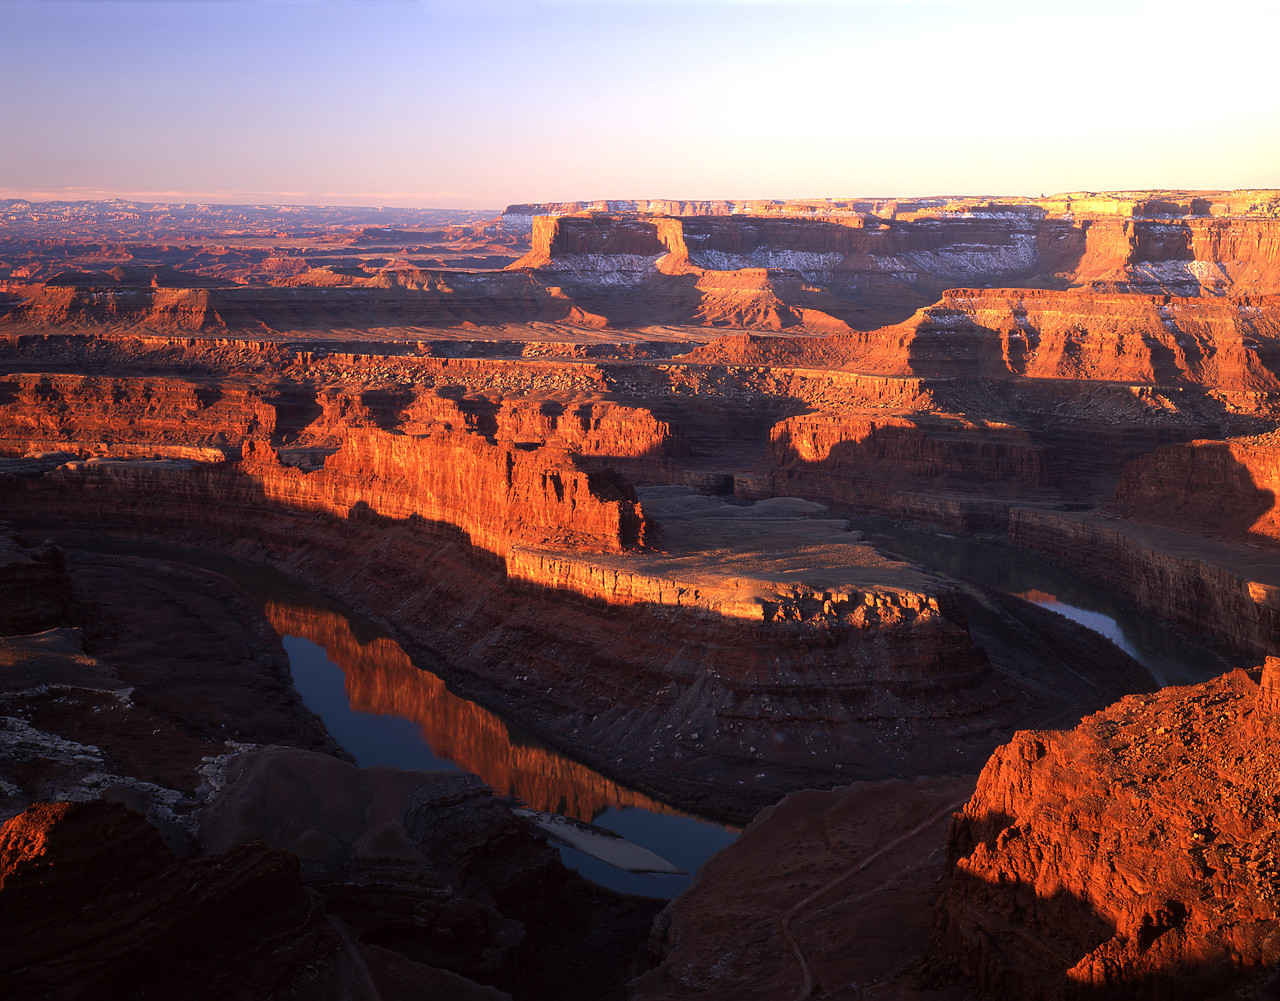 #970063-4 - View from Dead Horse Point, Dead Horse Point State Park, Utah, USA